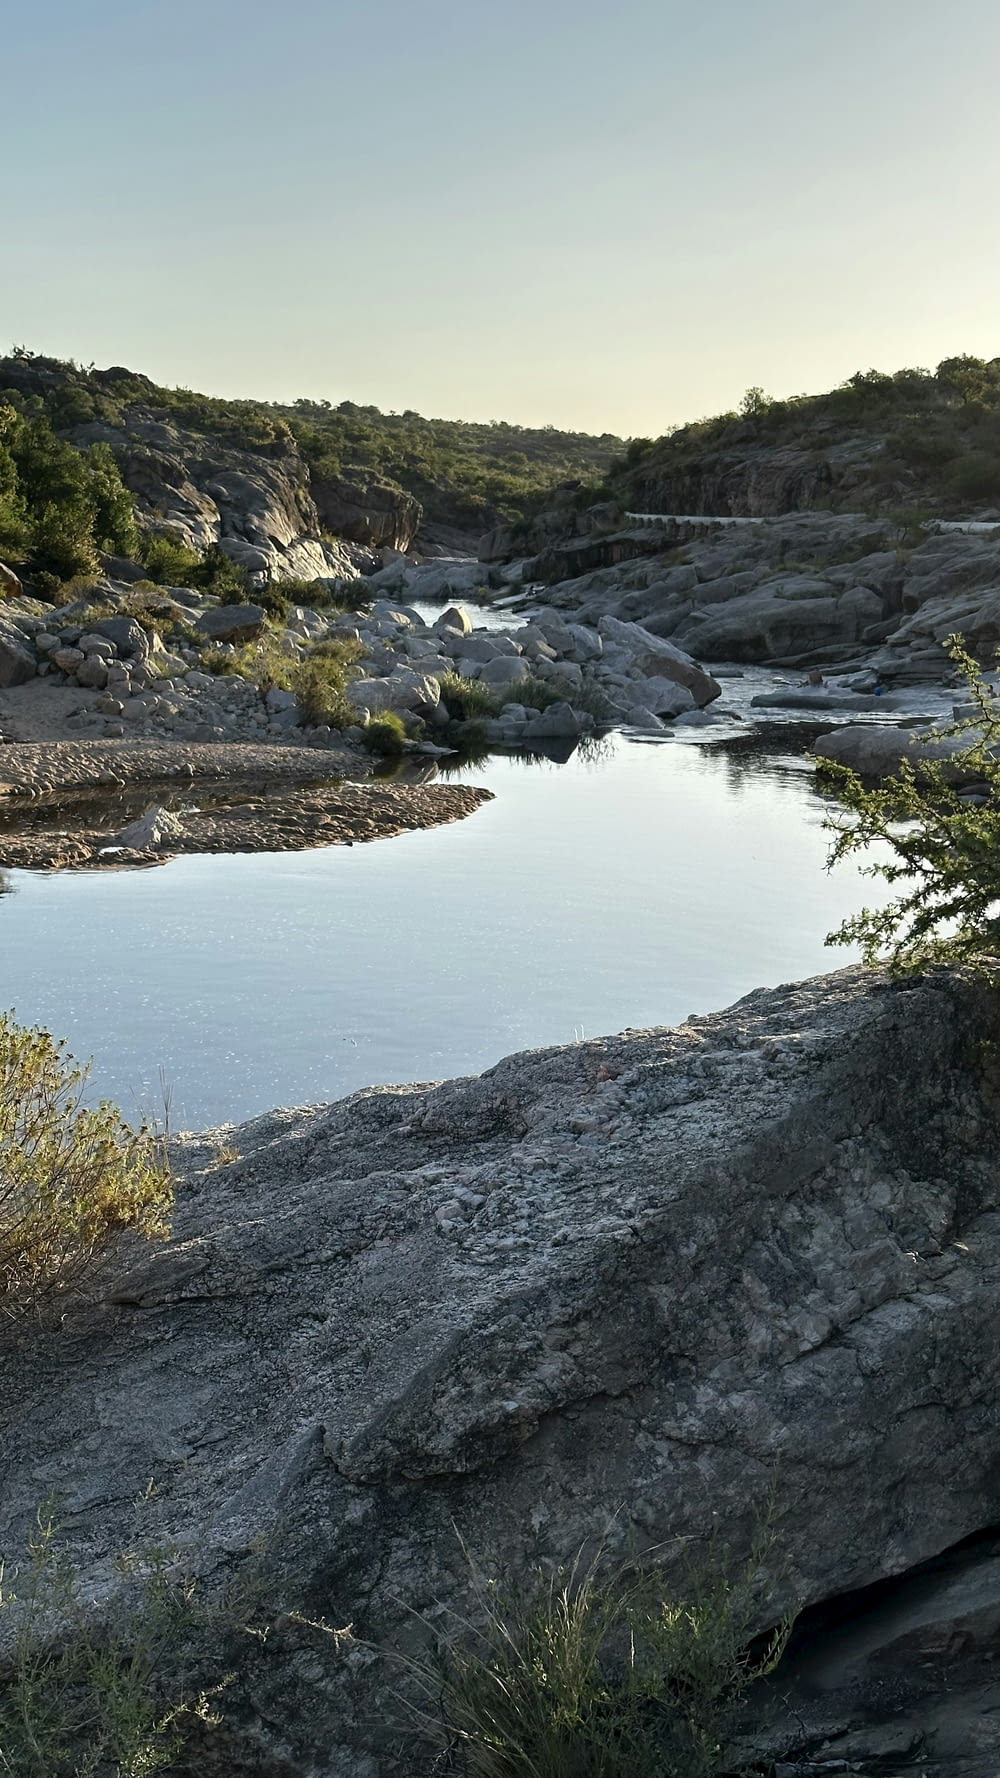 a large body of water surrounded by rocky terrain